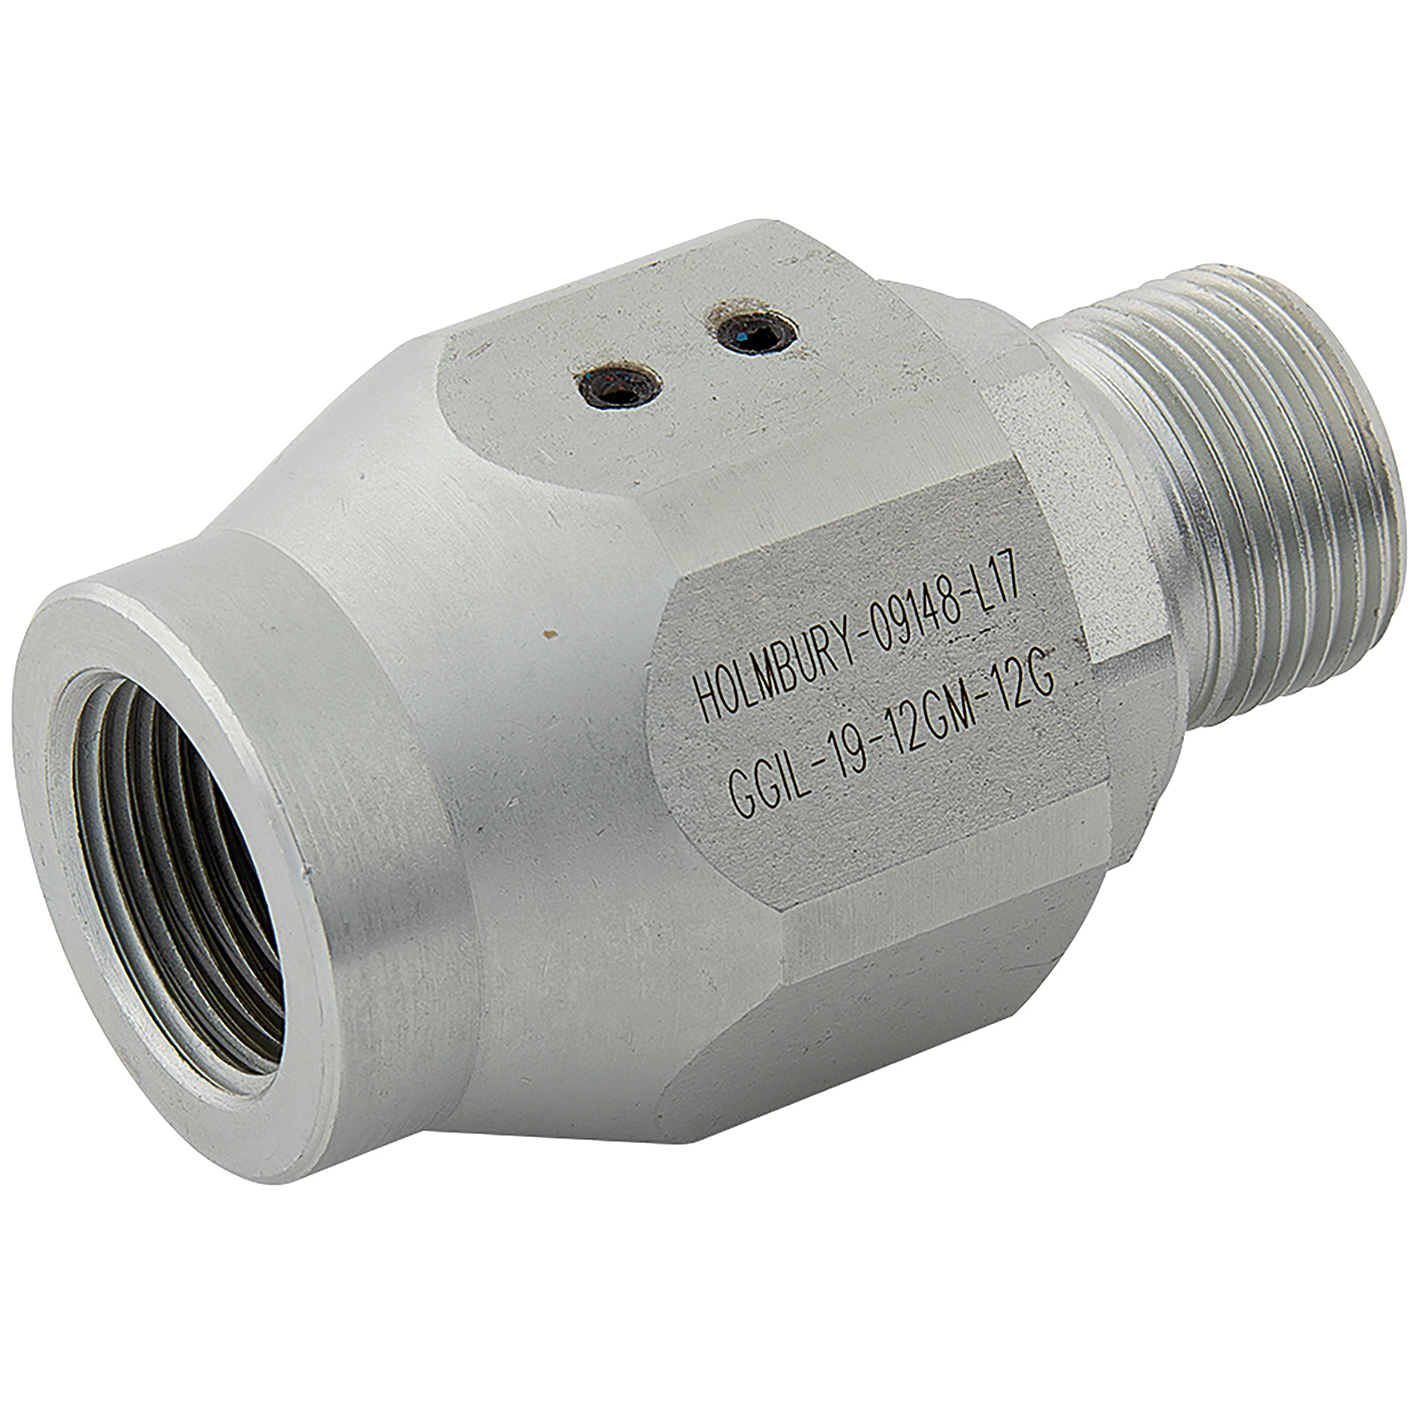 3/8" BSPP Rotary In-Line Coupling